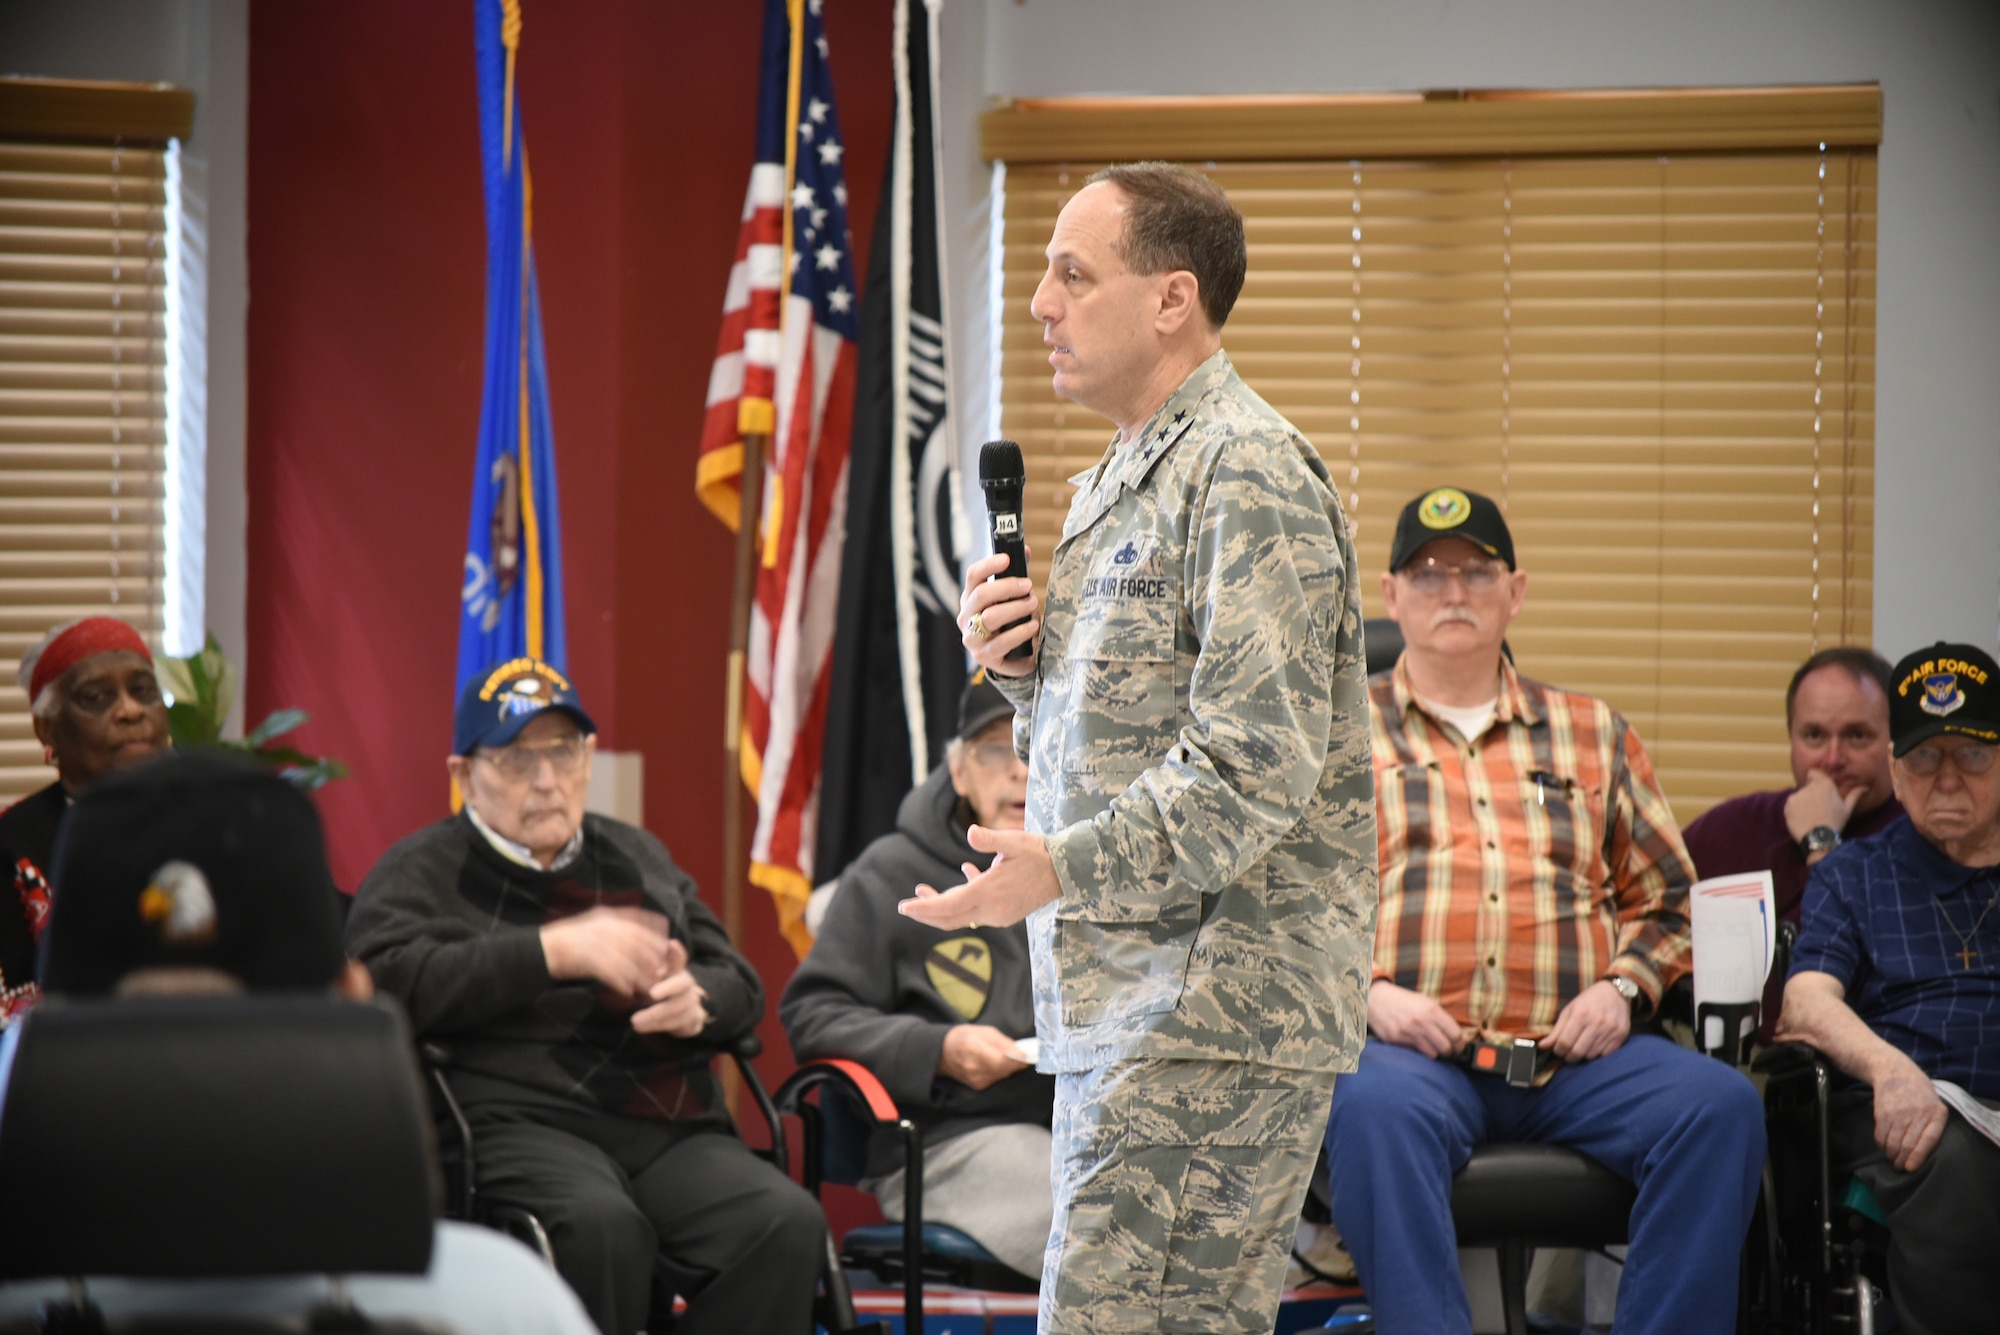 Air Force Sustainment Center Commander Lt. Gen. Lee K. Levy II poses a question to the Norman Veterans Center military panel during a Feb. 28, 2018, visit to the center in Norman, Oklahoma. The 15-member panel frequently visits area schools to share their military experiences and life lessons with students.